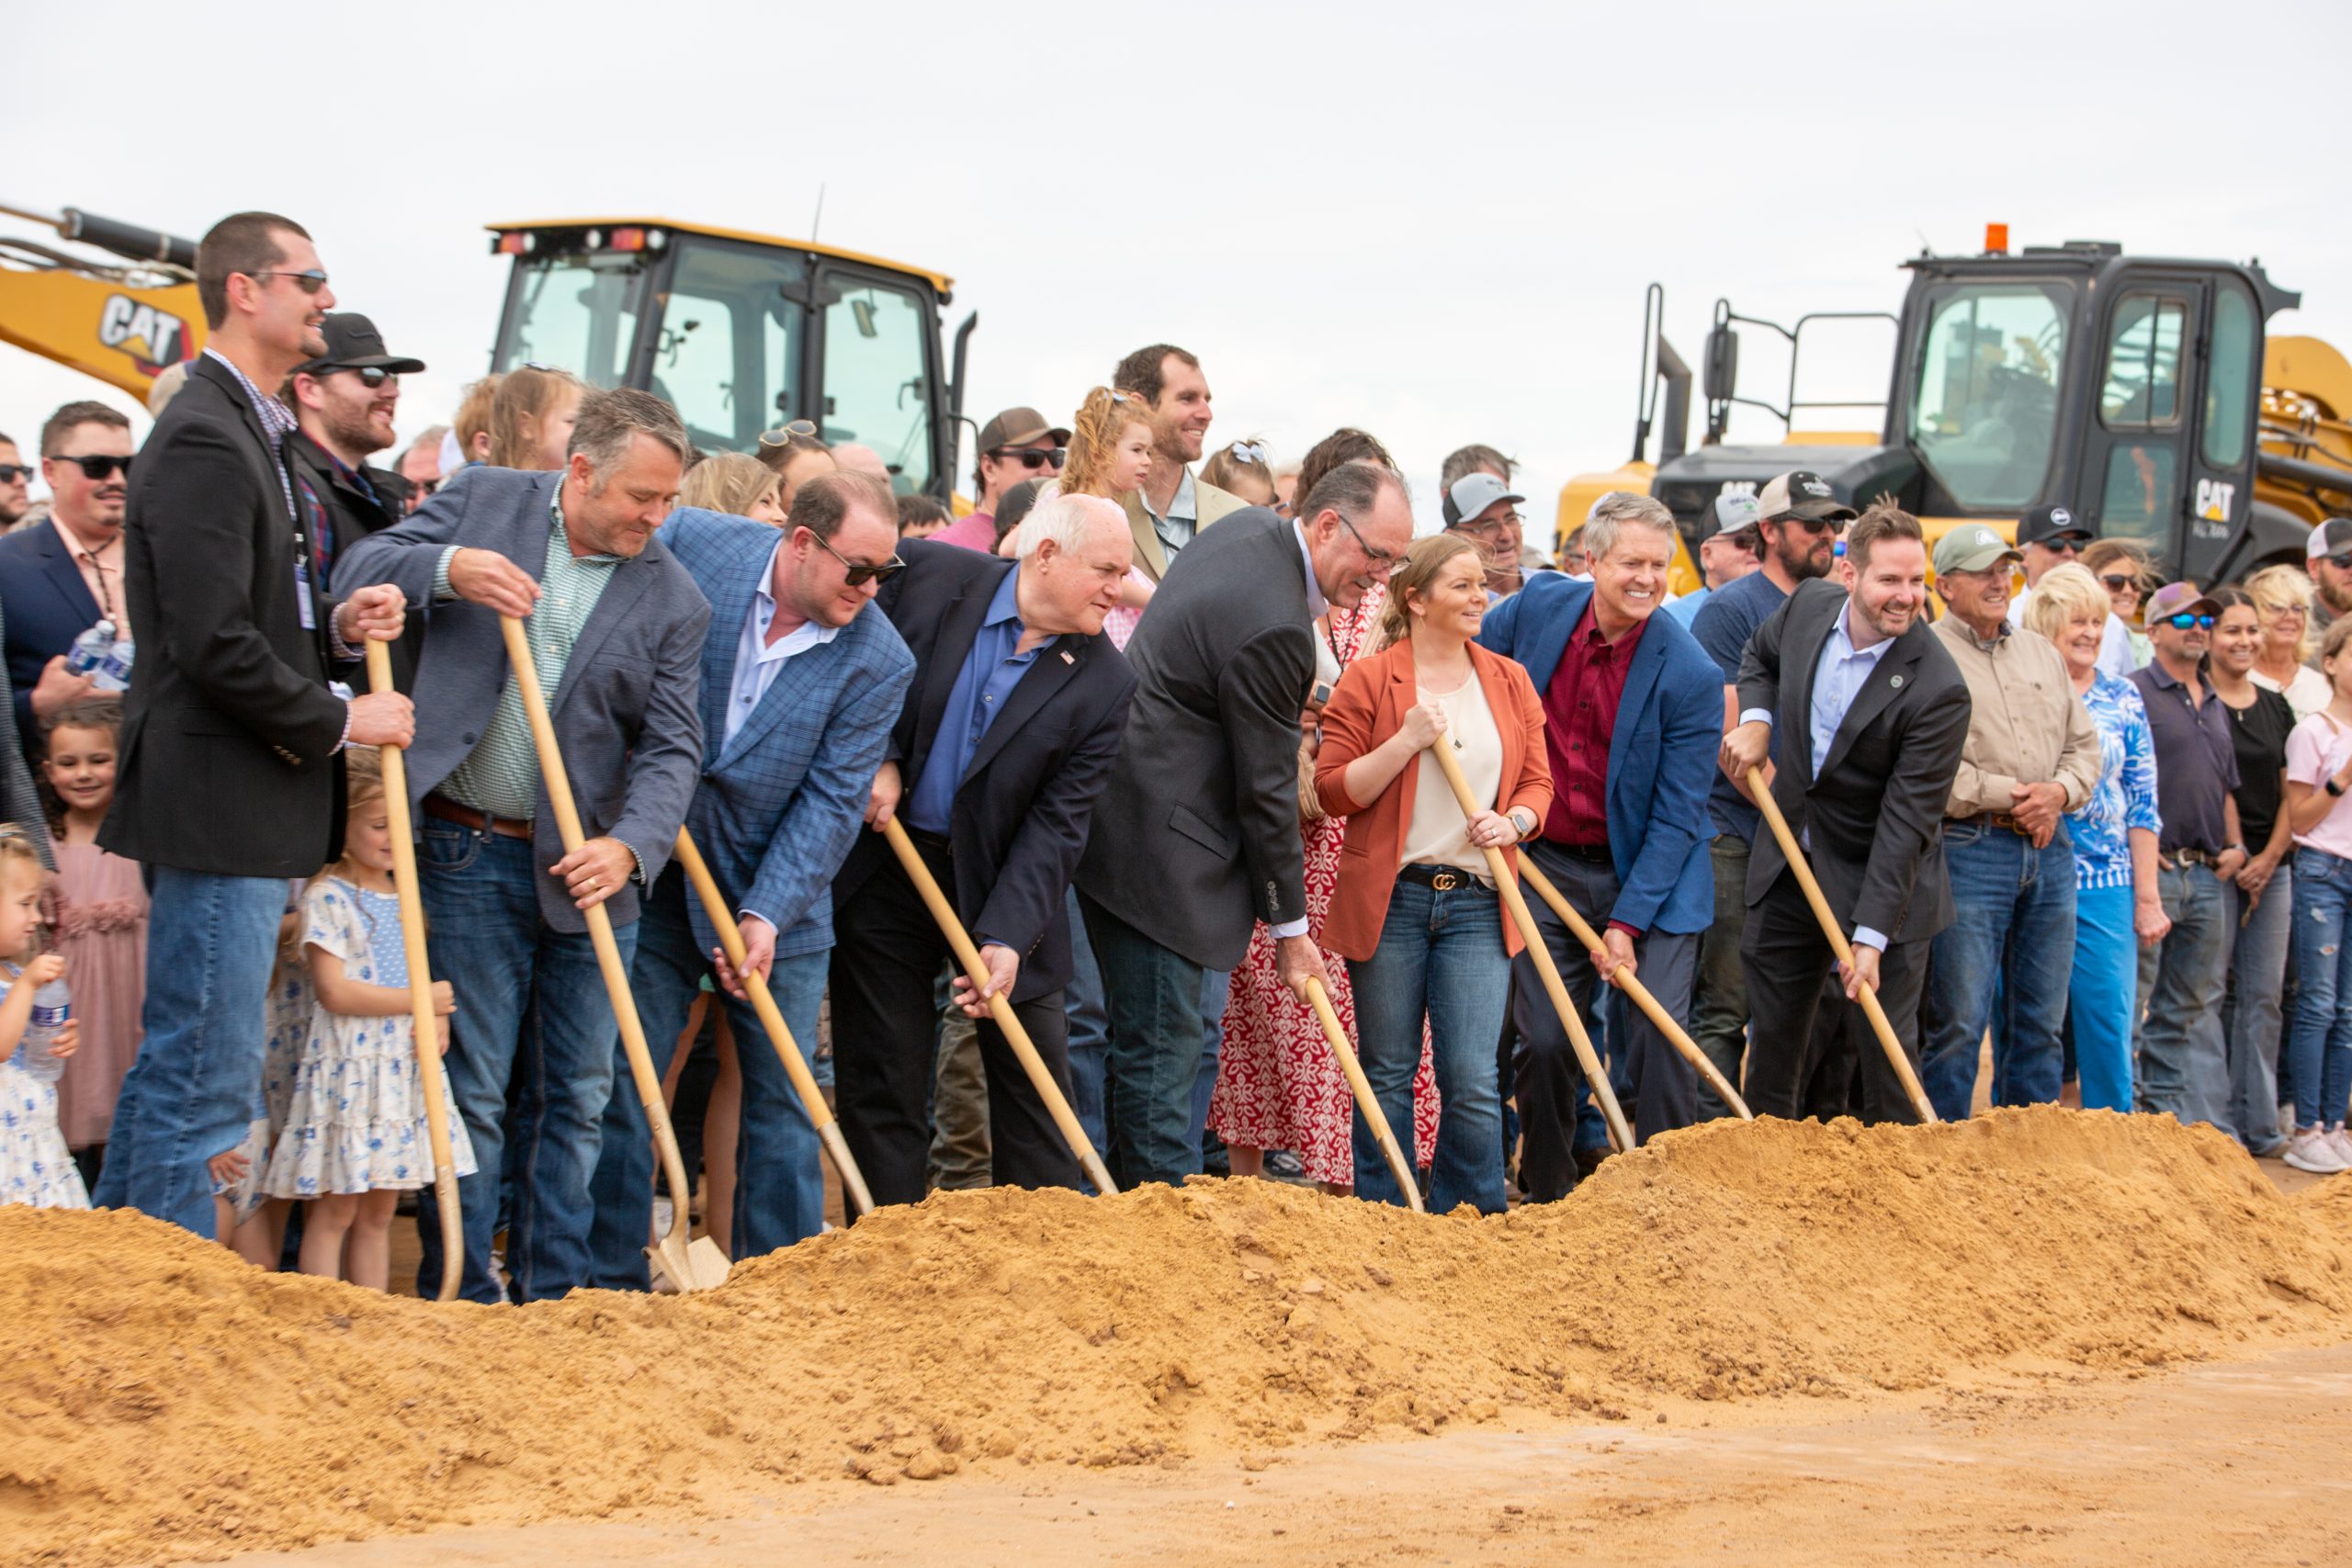 Blue Sky Farms officials broke ground for the Twin Circle Dairy near Lewis Kansas, April 26. The dairy is expected to be home to nearly 25,000 cows and construction should be completed in 2025. Currently Blue Sky Farms has six dairies in Texas and another location where heifer calves are developed. More farm locations provide feed for the cows and heifers, as well as a harvest and hauling business. Watch for more information from the groundbreaking event and speakers. (Journal photo by Kylene Scott.)